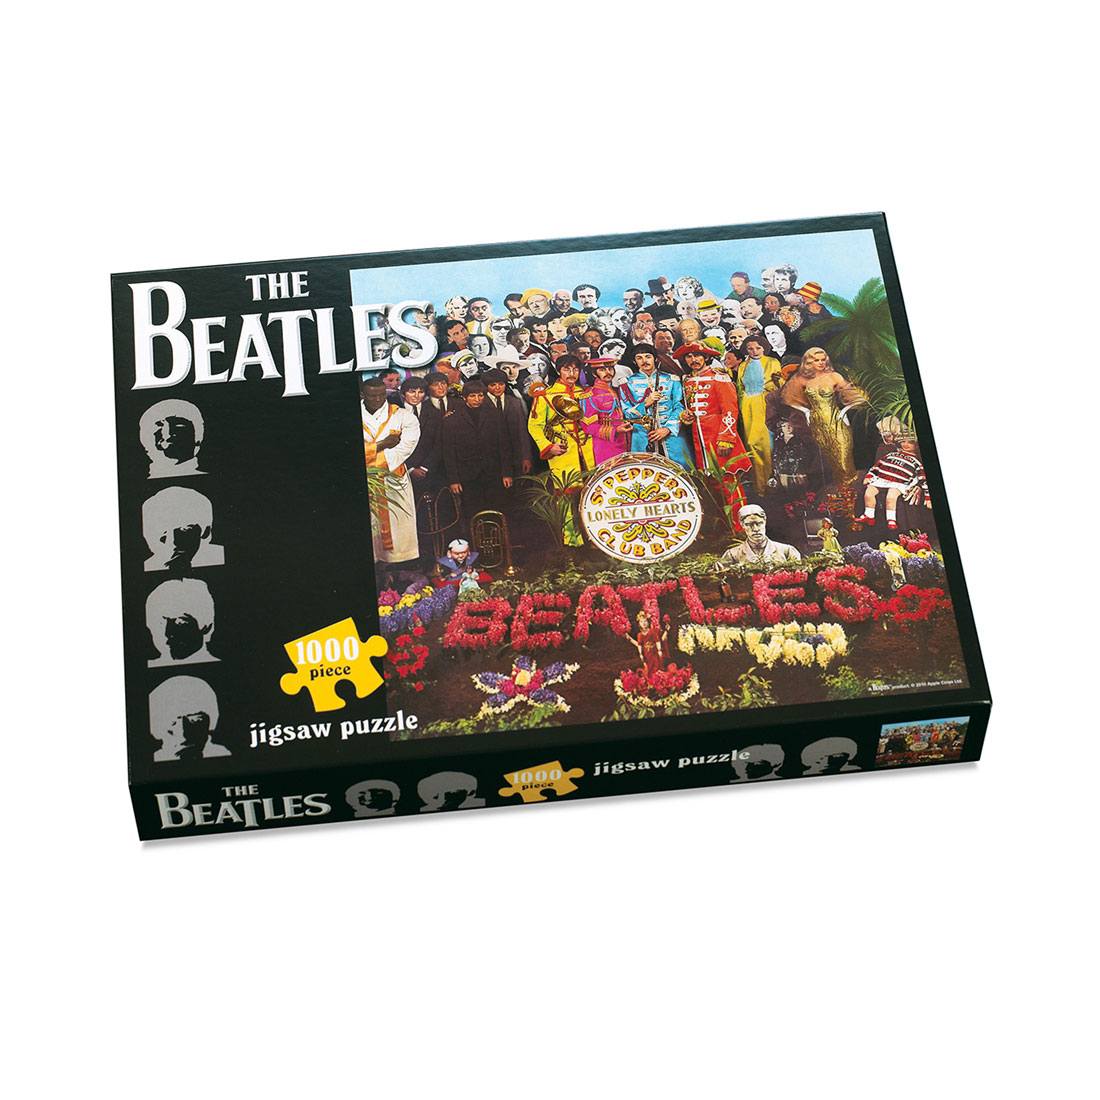 The Beatles Puzzle Sgt Pepper